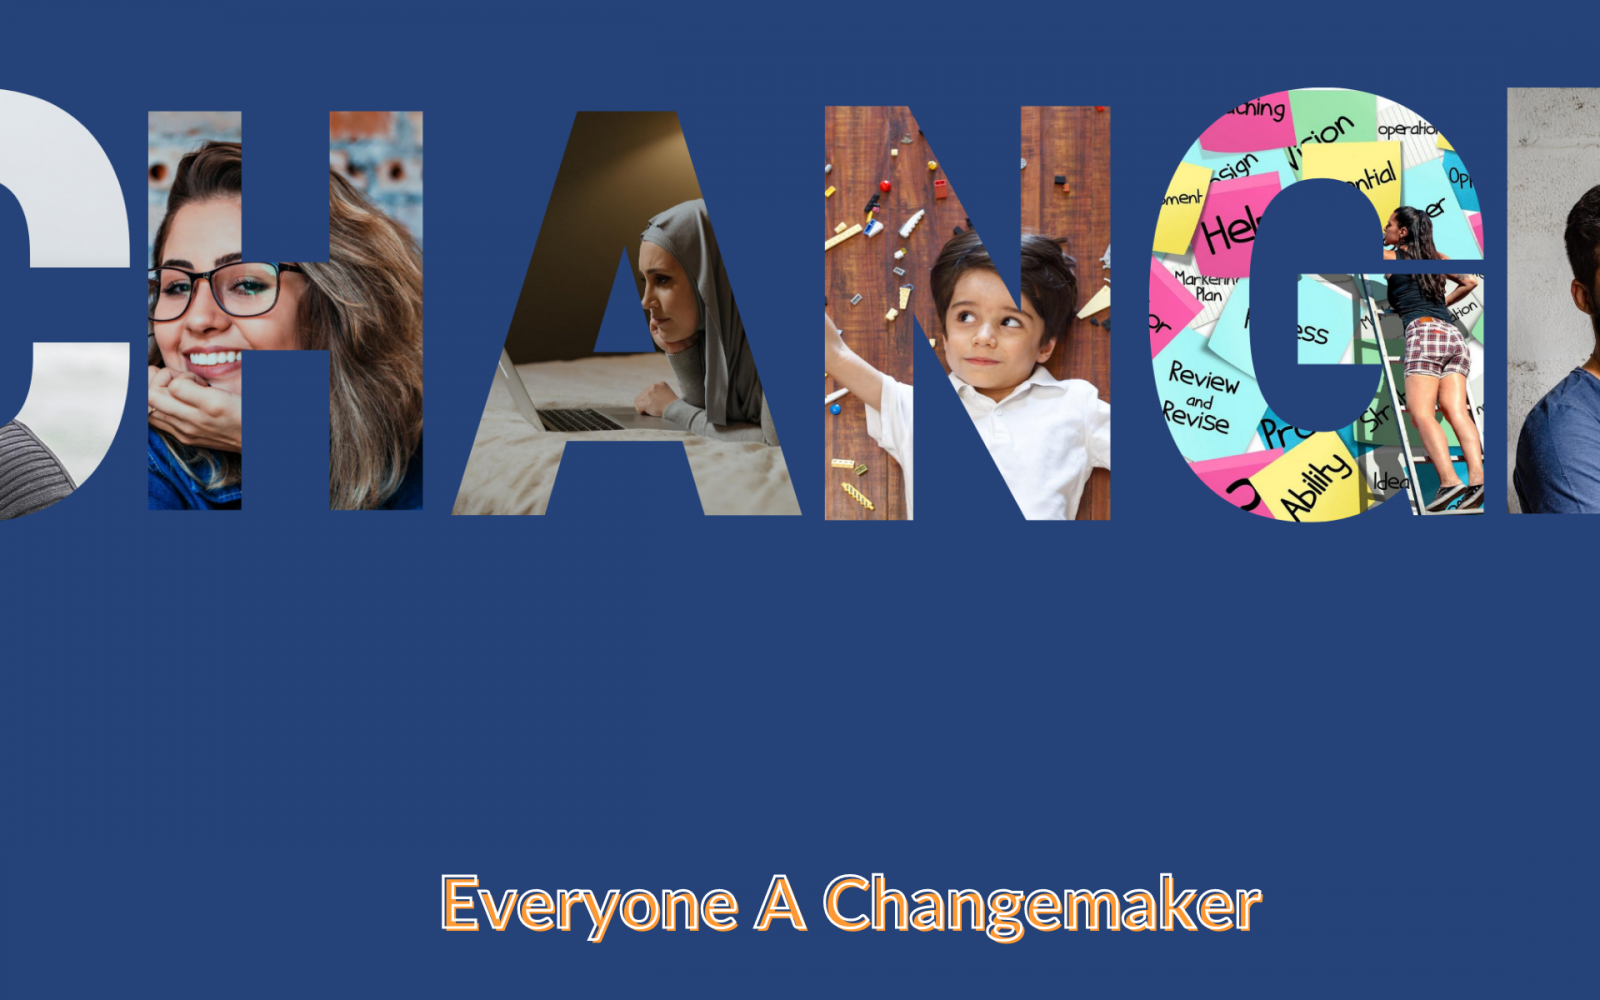 The Word Change. Everyone A changemaker